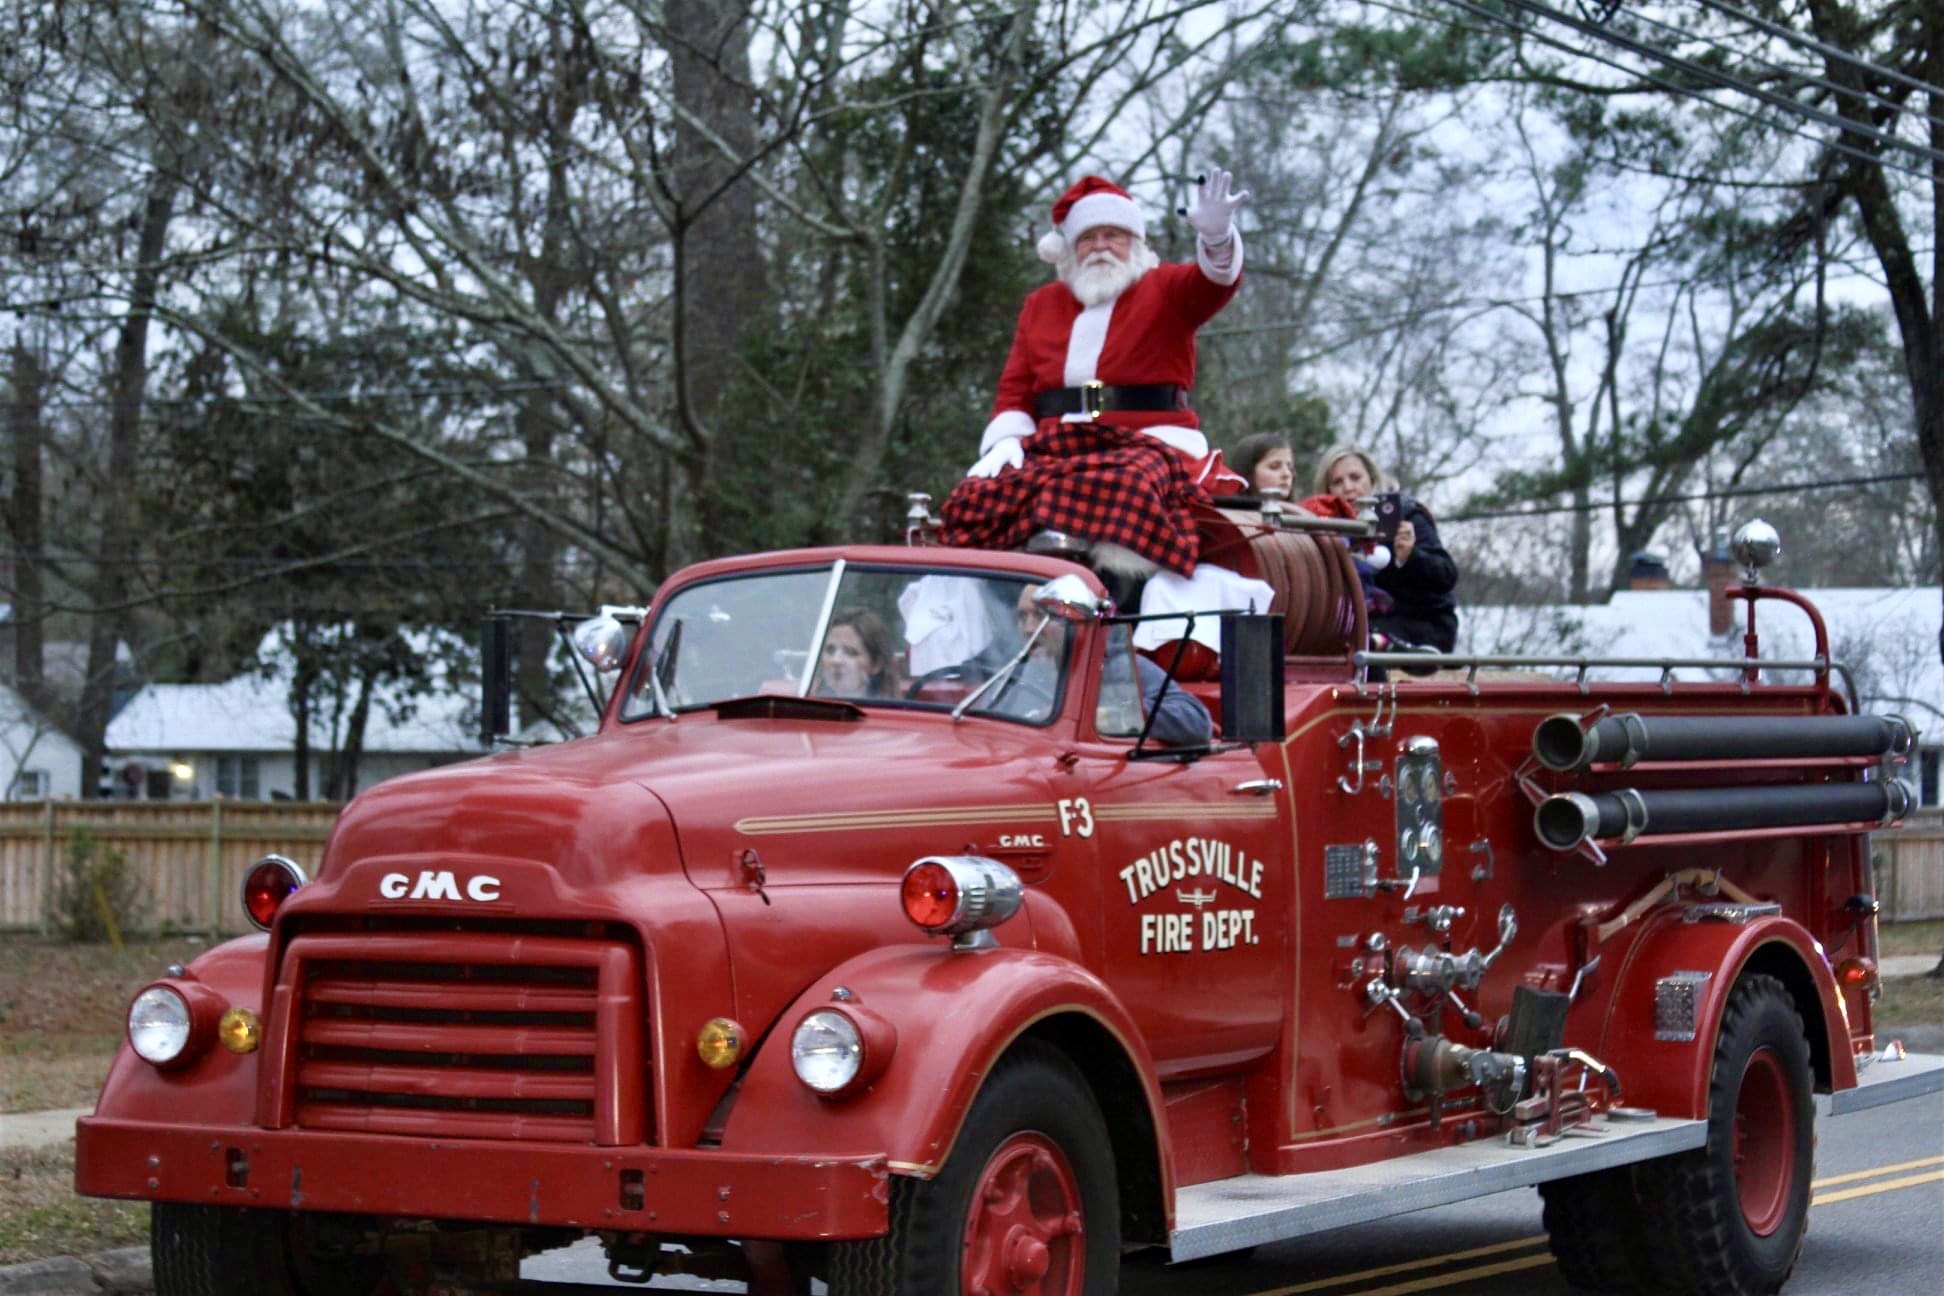 Milam & Company to be presenting sponsor for Trussville Christmas Parade